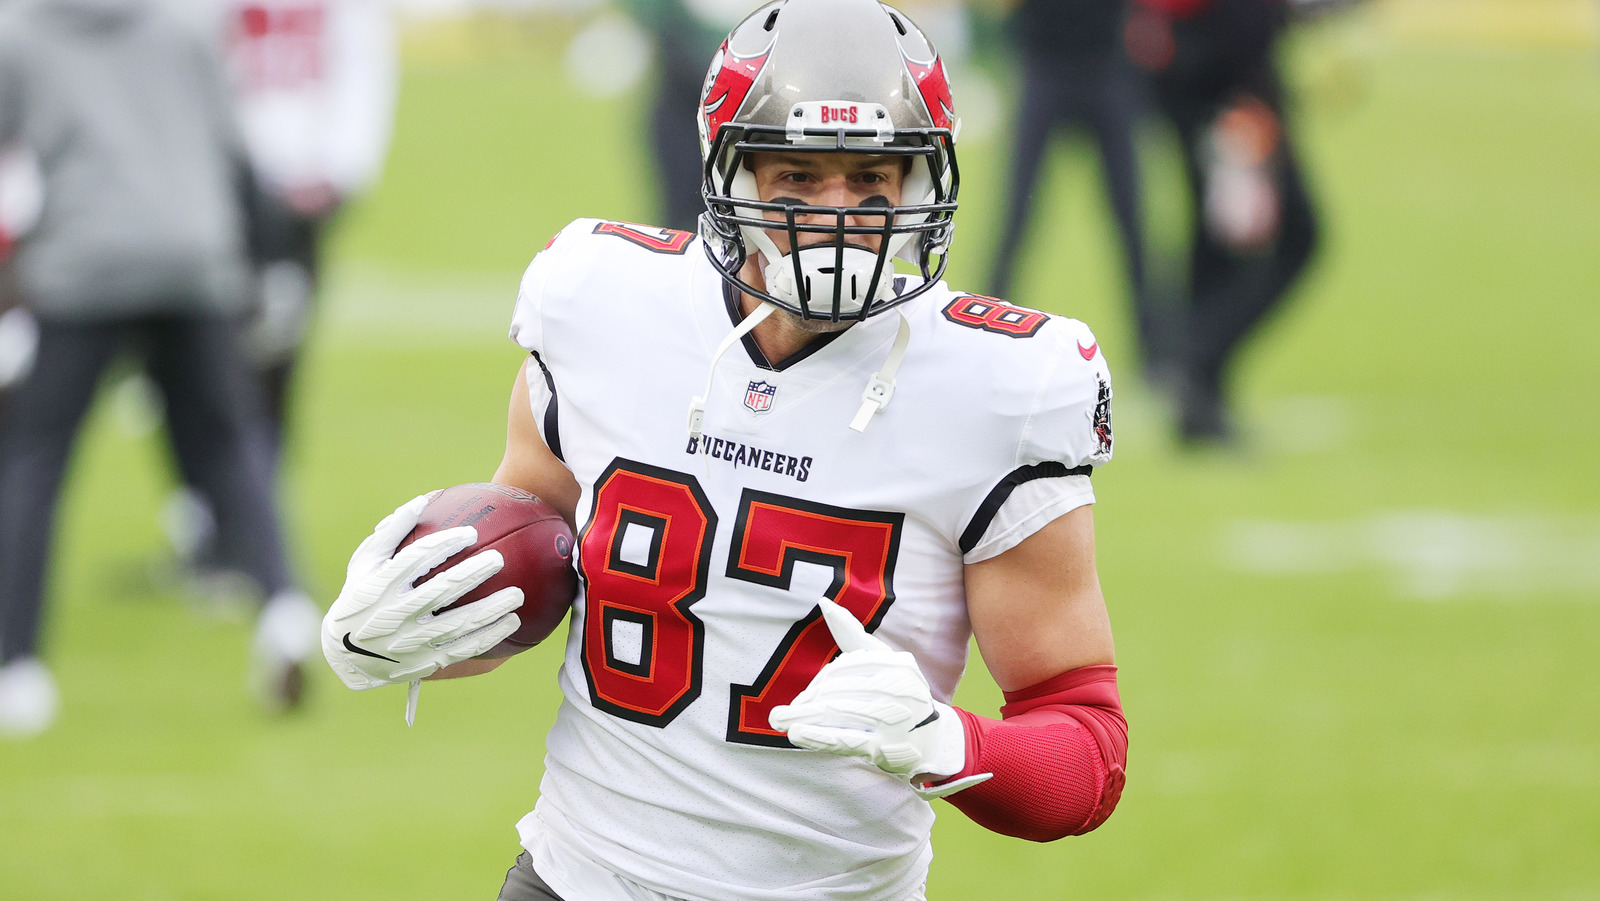 Rob Gronkowski: The Truth About The Buccaneers' Tight End - Grunge.